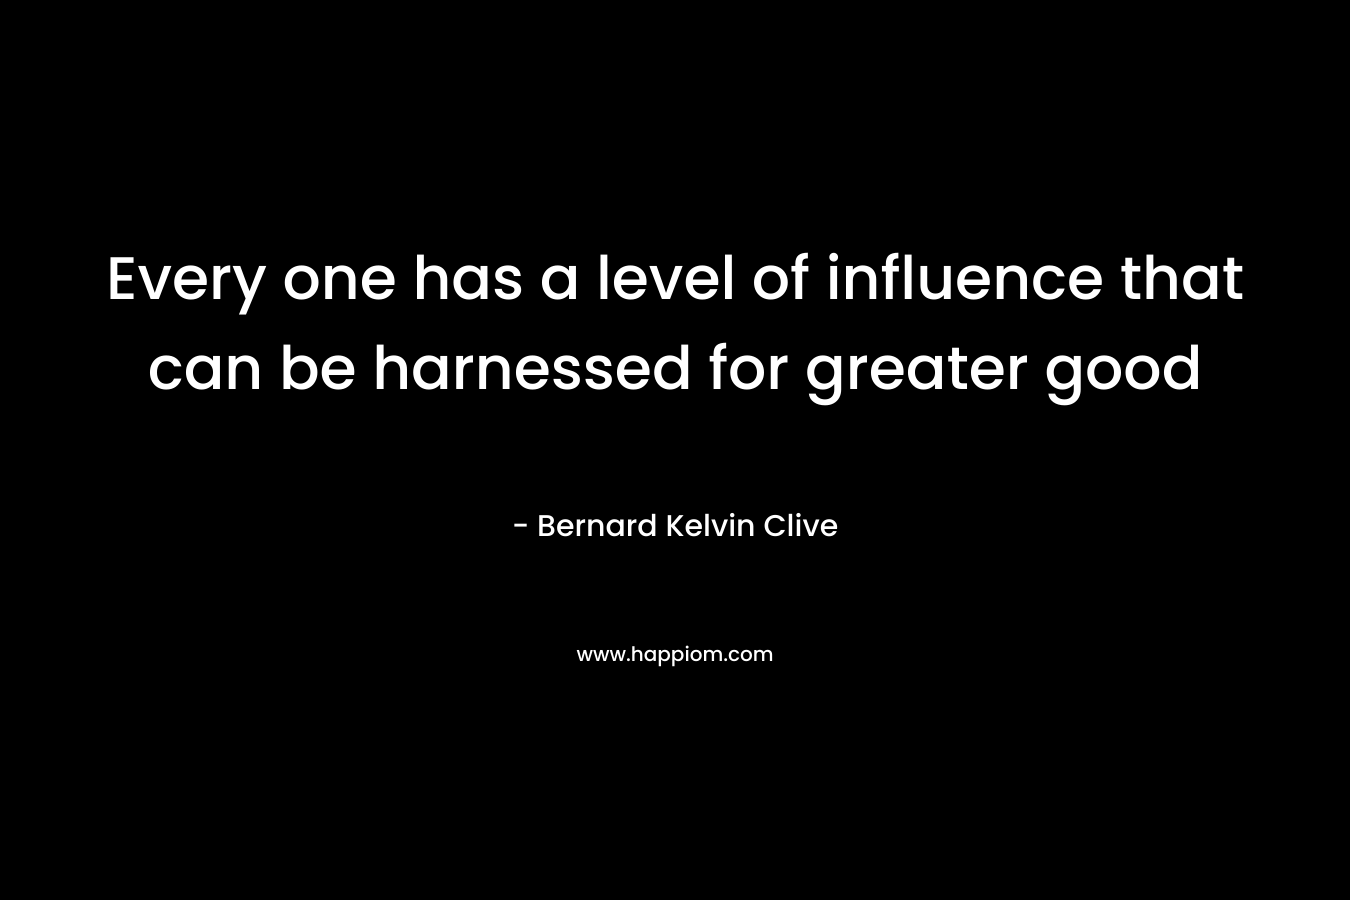 Every one has a level of influence that can be harnessed for greater good